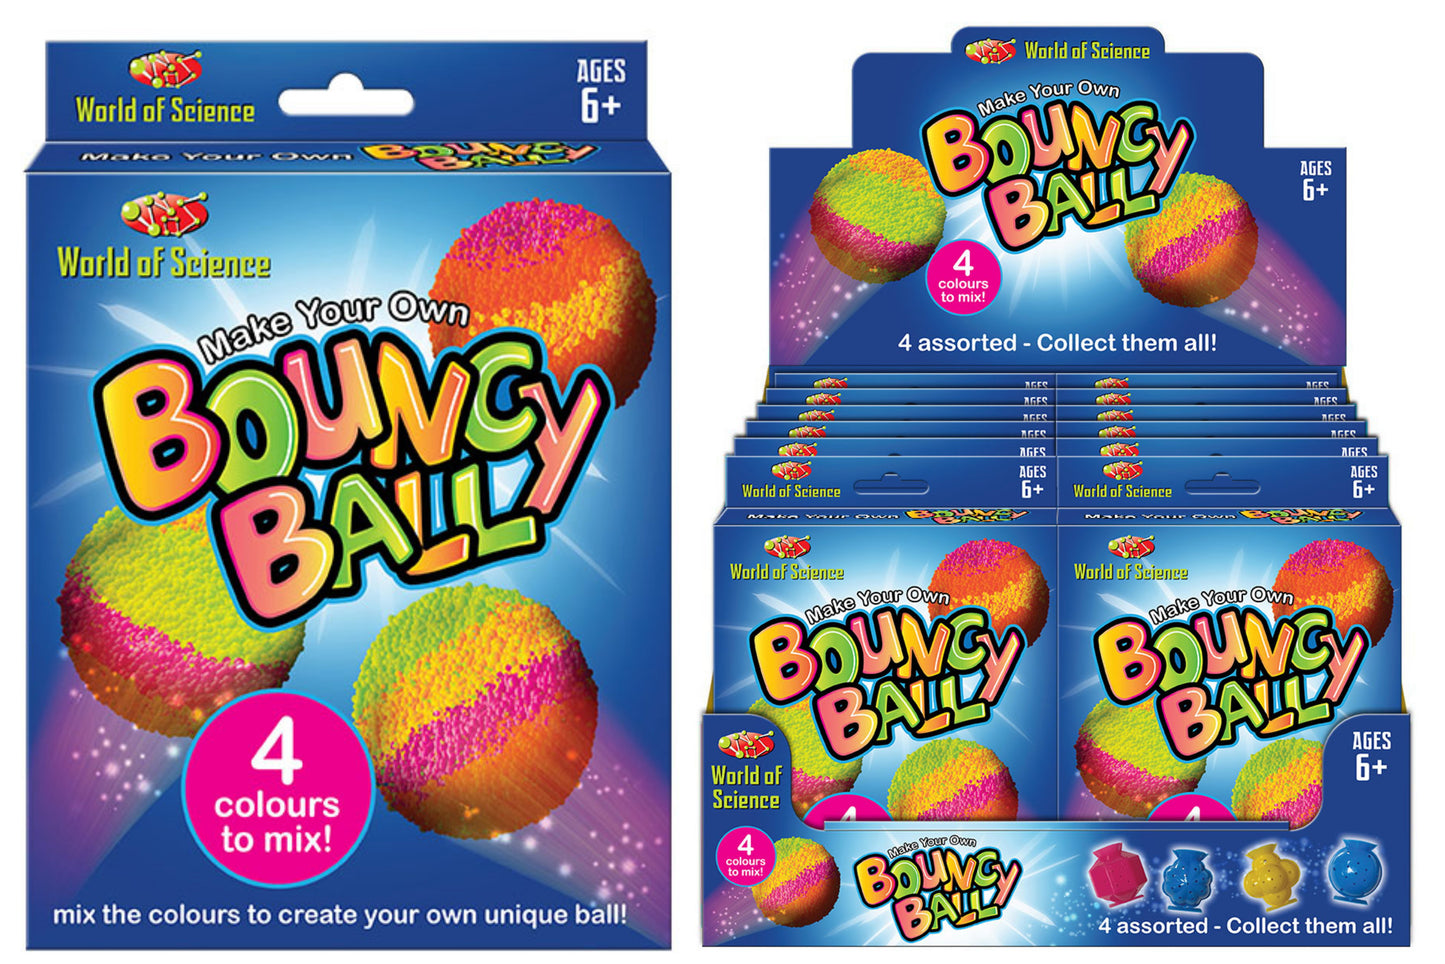 Make your own bouncy ball in colour